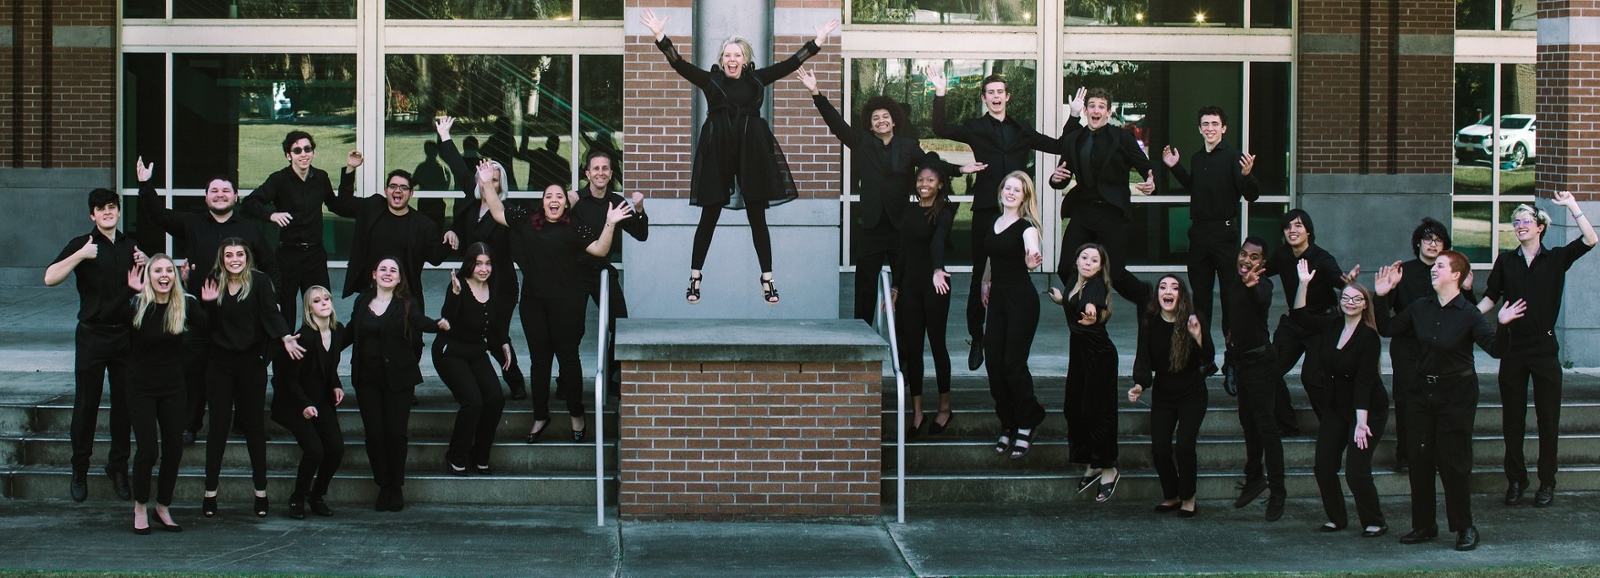 music students leaping into the air in front of building